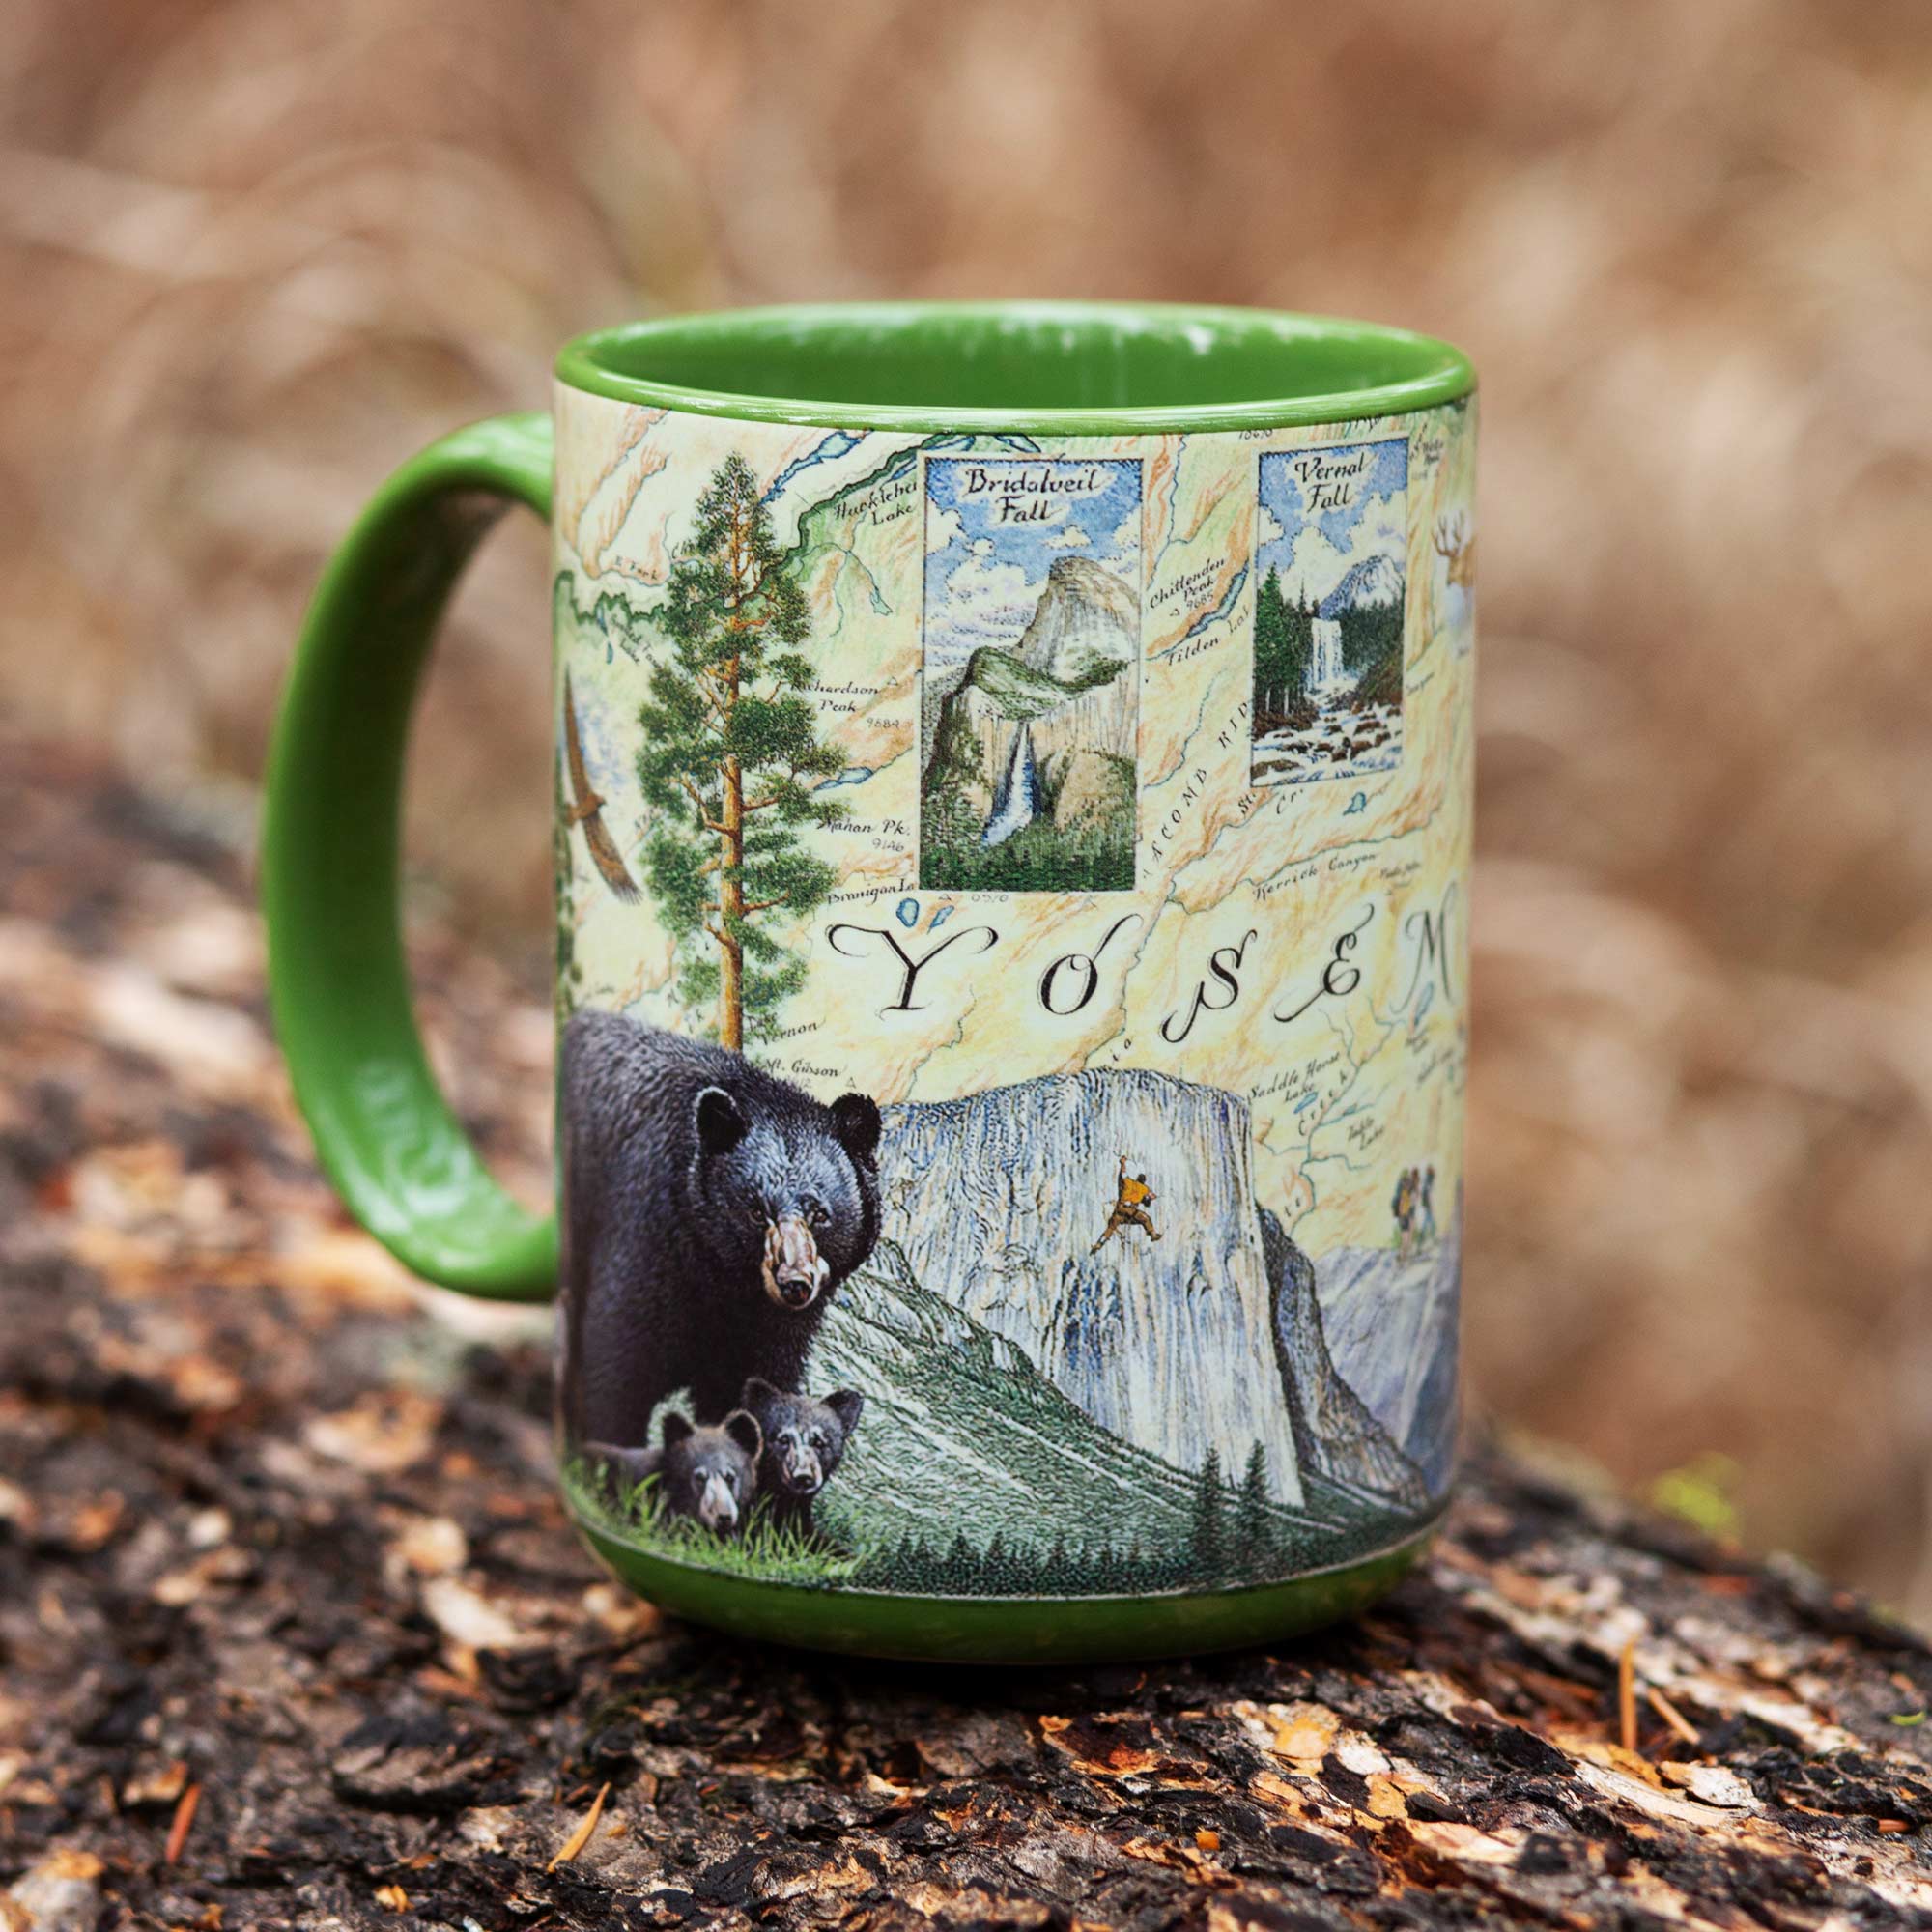 Green 16 oz Yosemite National Park Ceramic Mug with handle sitting on a log in a forest. 